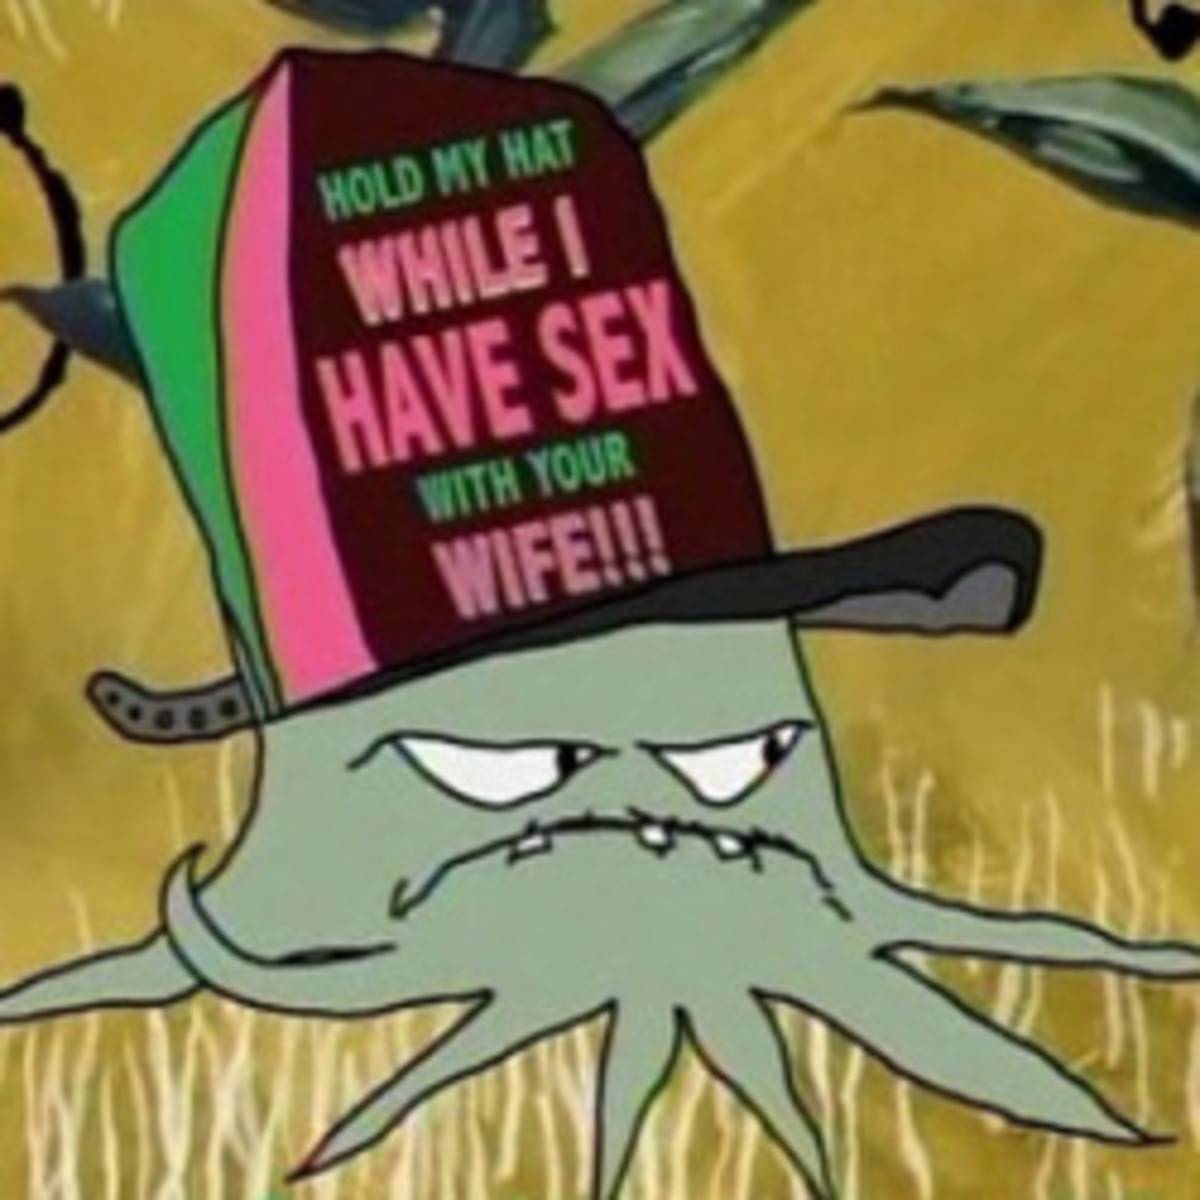 A compilation of squidbillies hats.